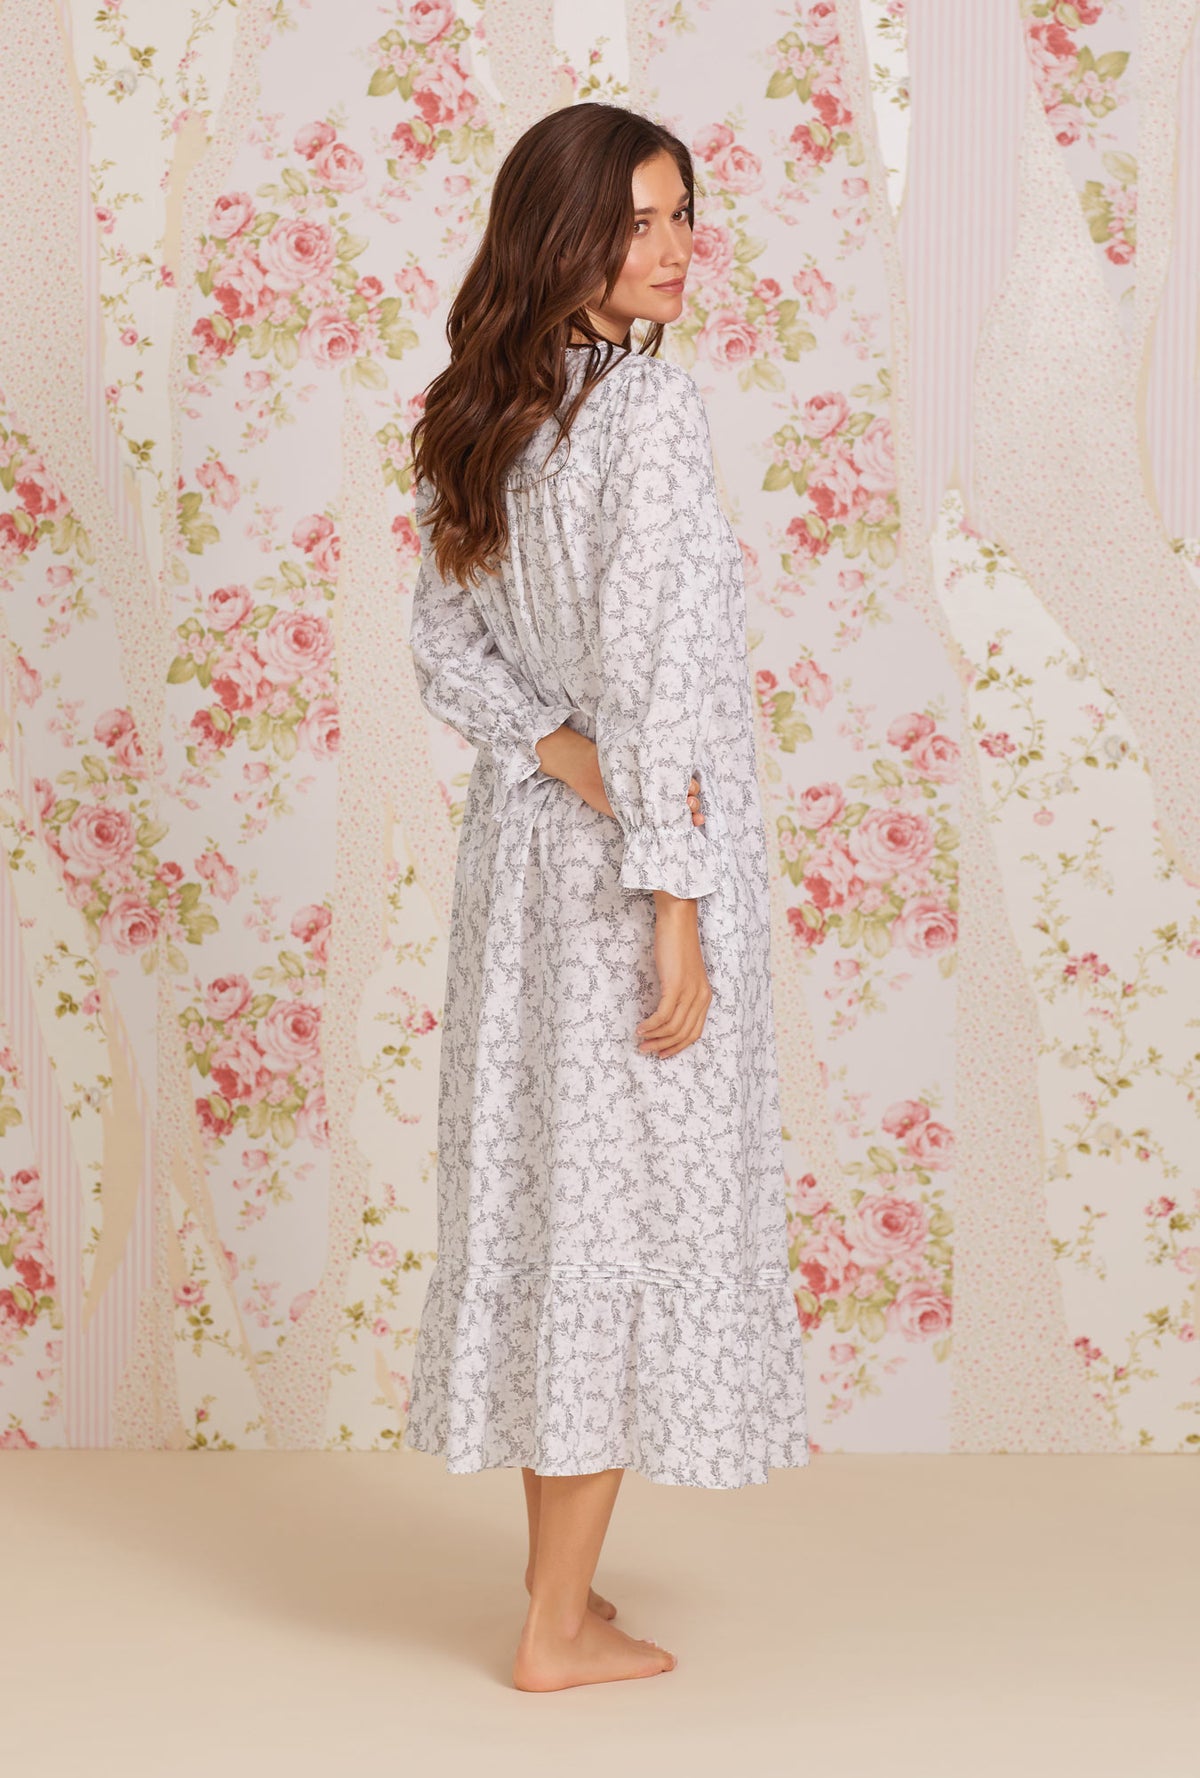 A lady wearing white long sleeve eileen cotton nightgown with grey fleur print.